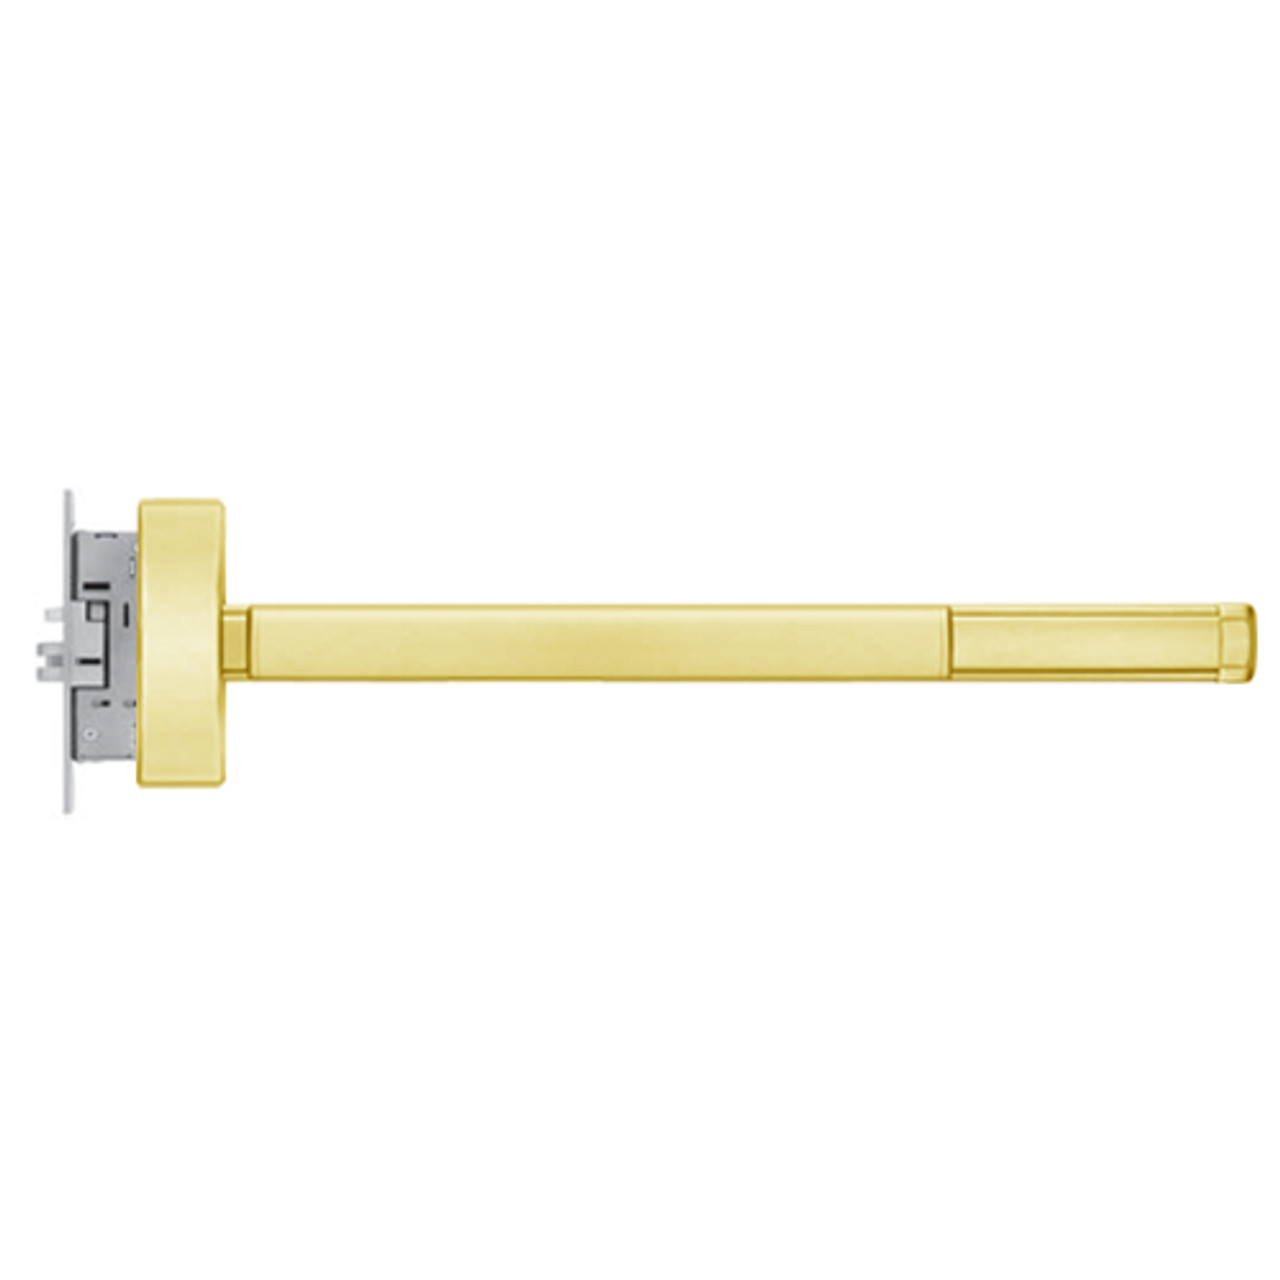 MLR2308-LHR-605-48 PHI 2300 Series Apex Mortise Exit Device with Motorized Latch Retraction Prepped for Key Controls Lever/Knob in Bright Brass Finish